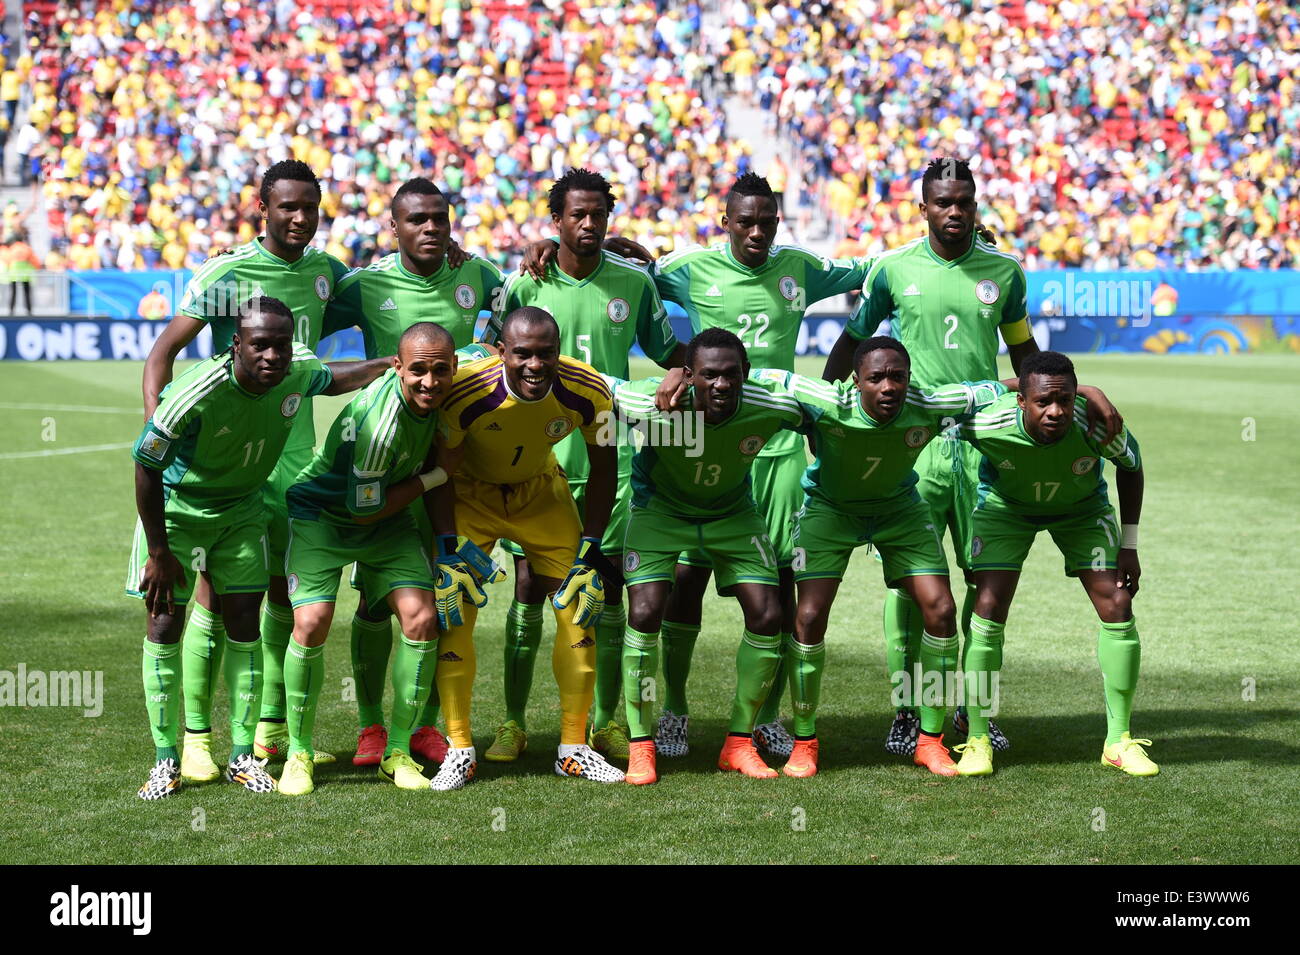 Brasilia, Brazil. 30th June, 2014. (back L-R) John Obi Mikel, Emmanuel Emenike, Efe Ambrose, Kenneth Omeruo, Joseph Yobo (front L-R) Victor Moses, Peter Odemwingie, goalkeeper Vincent Enyeama, Juwon Oshaniwa, Ahmed Musa, Ogenyi Onazi of Nigeria pose for a team photo during the FIFA World Cup 2014 round of 16 match between France and Nigeria at the Estadio National Stadium in Brasilia, Brazil, on 30 June 2014. Credit:  dpa picture alliance/Alamy Live News Stock Photo